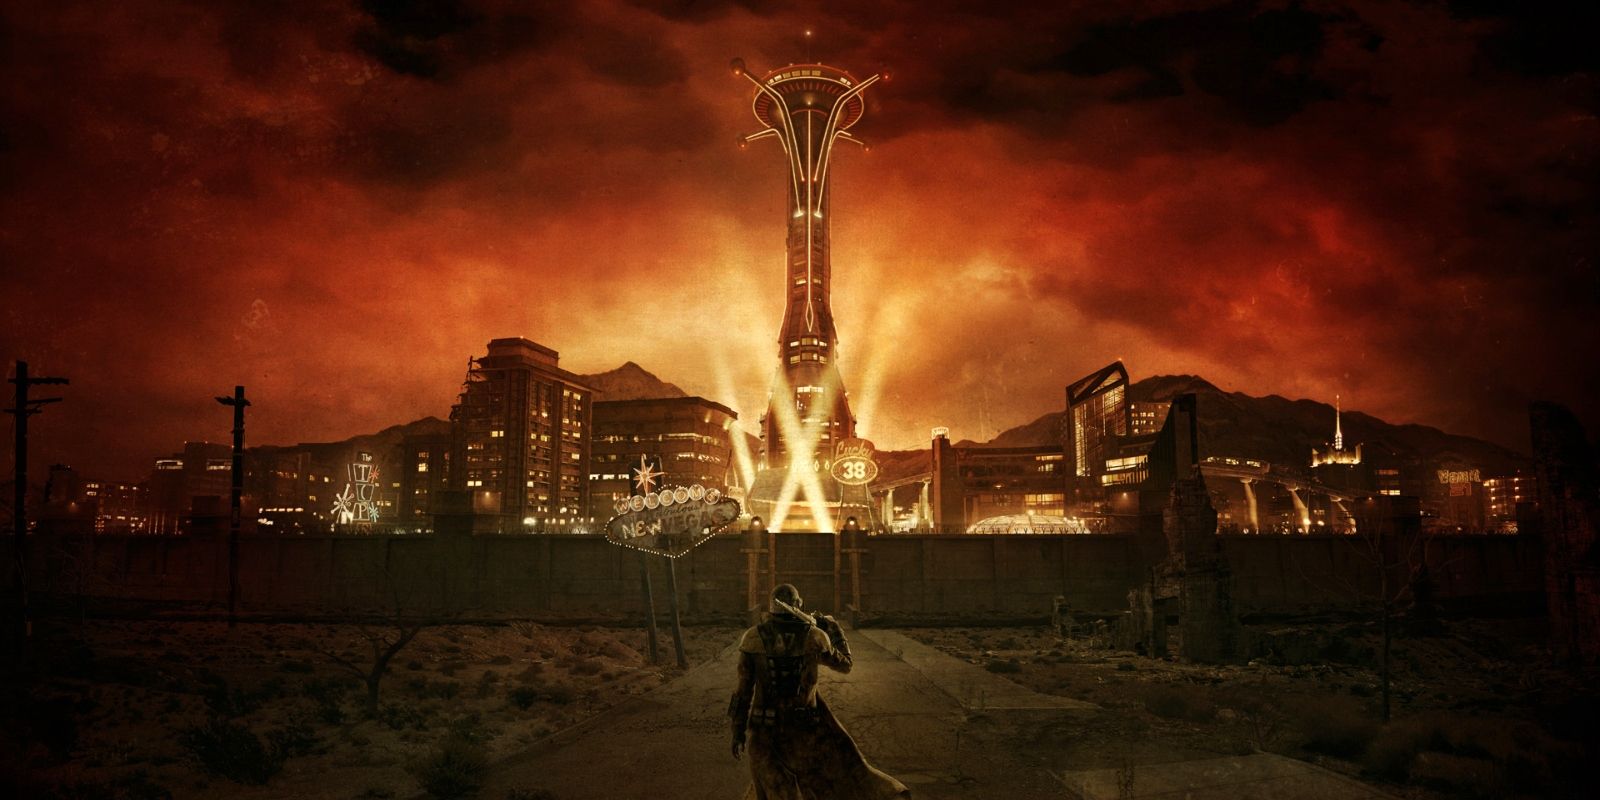 Key art from Fallout New Vegas showing a man walking towards the entrance to a city.